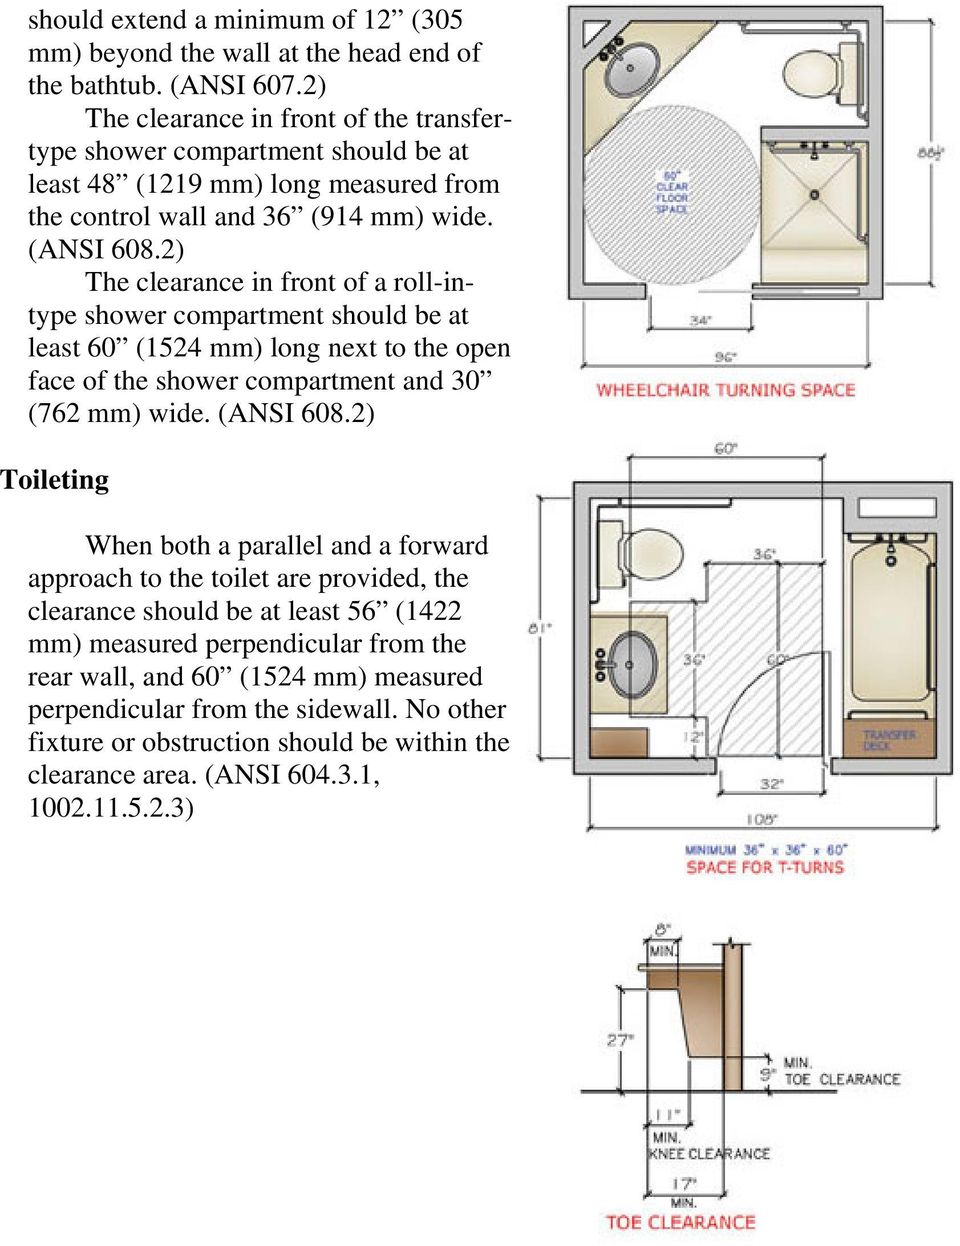 2) The clearance in front of a roll-intype shower compartment should be at least 60 (1524 mm) long next to the open face of the shower compartment and 30 (762 mm) wide. (ANSI 608.